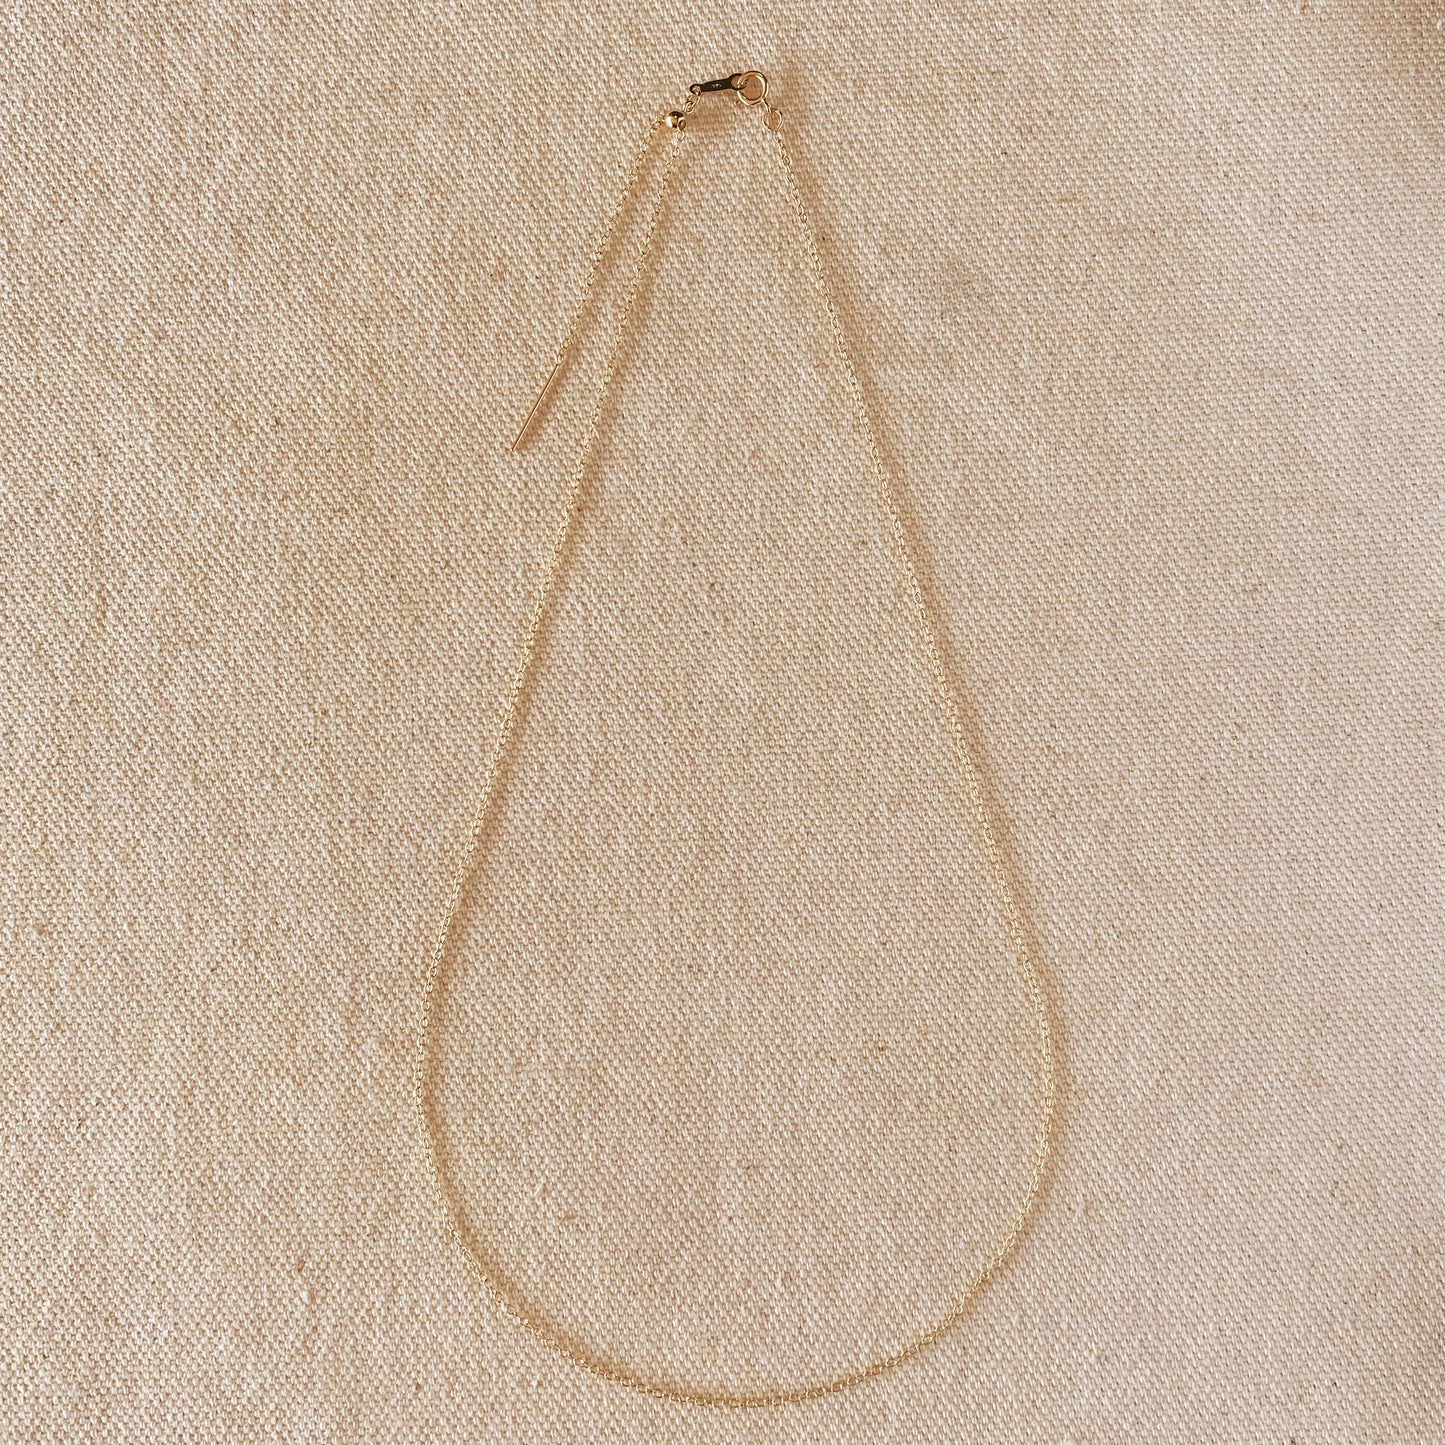 14k Solid Gold Adjustable Add a Bead Cable Chain